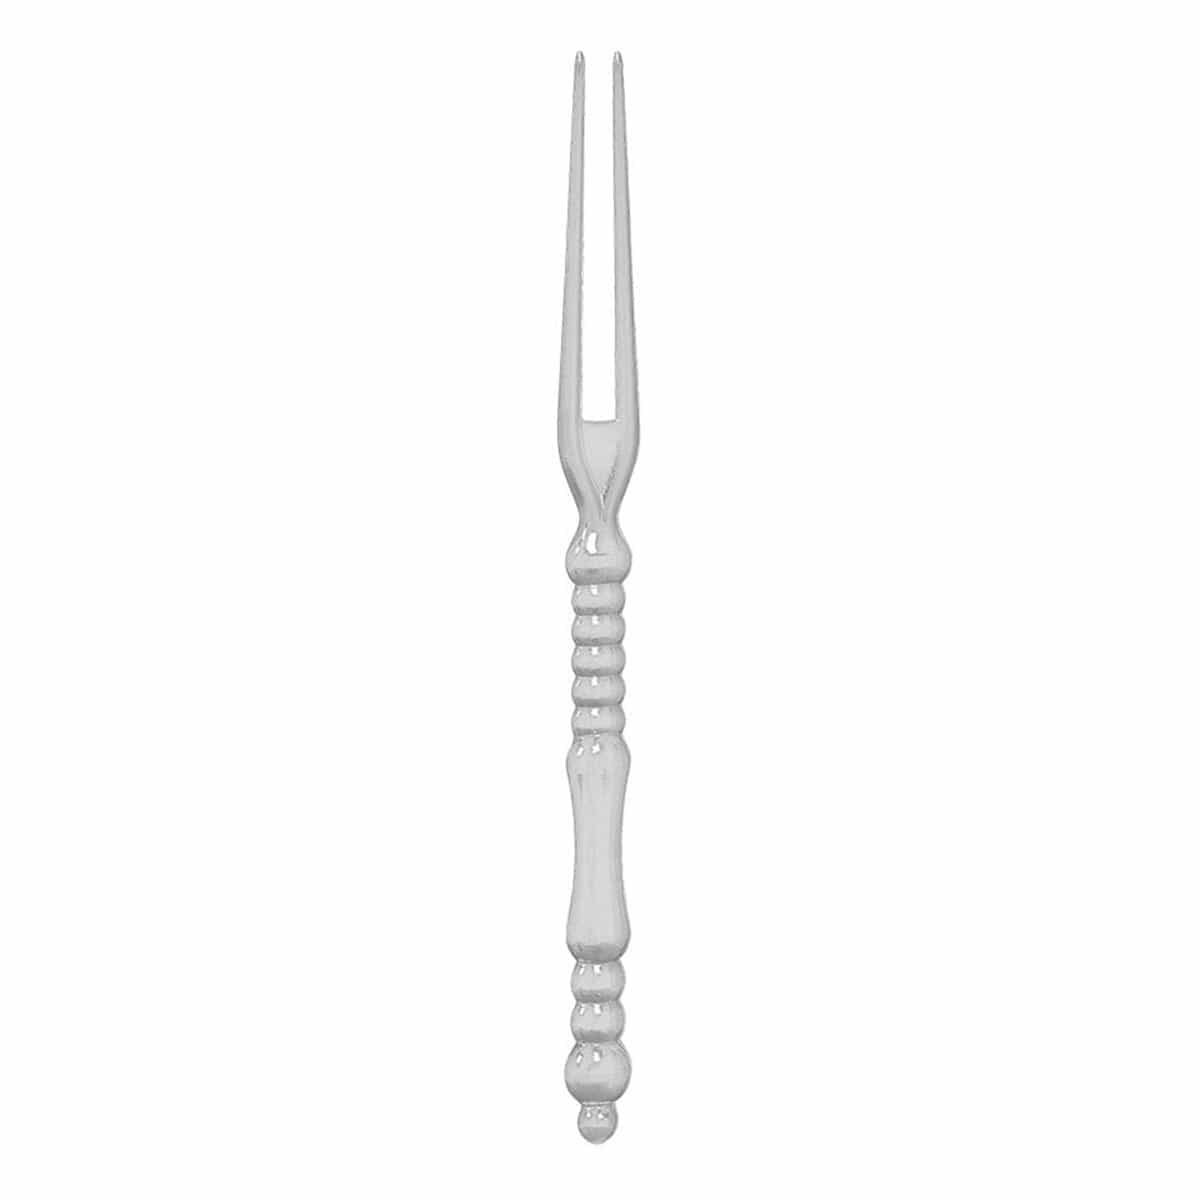 Buy Plasticware Cocktail Fork Picks - Silver 150/pkg sold at Party Expert